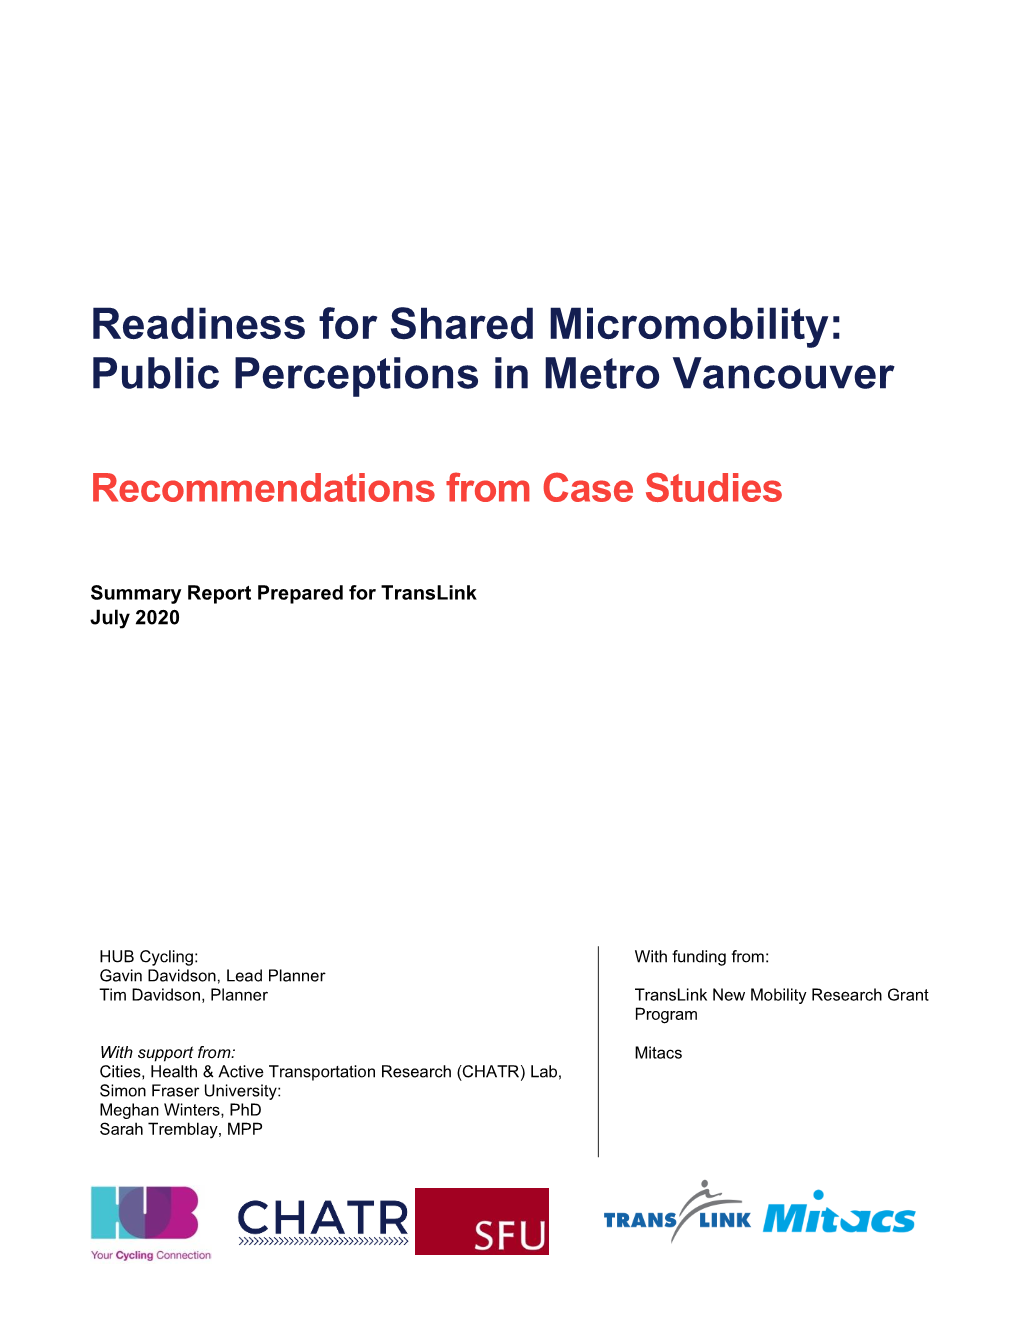 Readiness for Shared Micromobility: Public Perceptions in Metro Vancouver